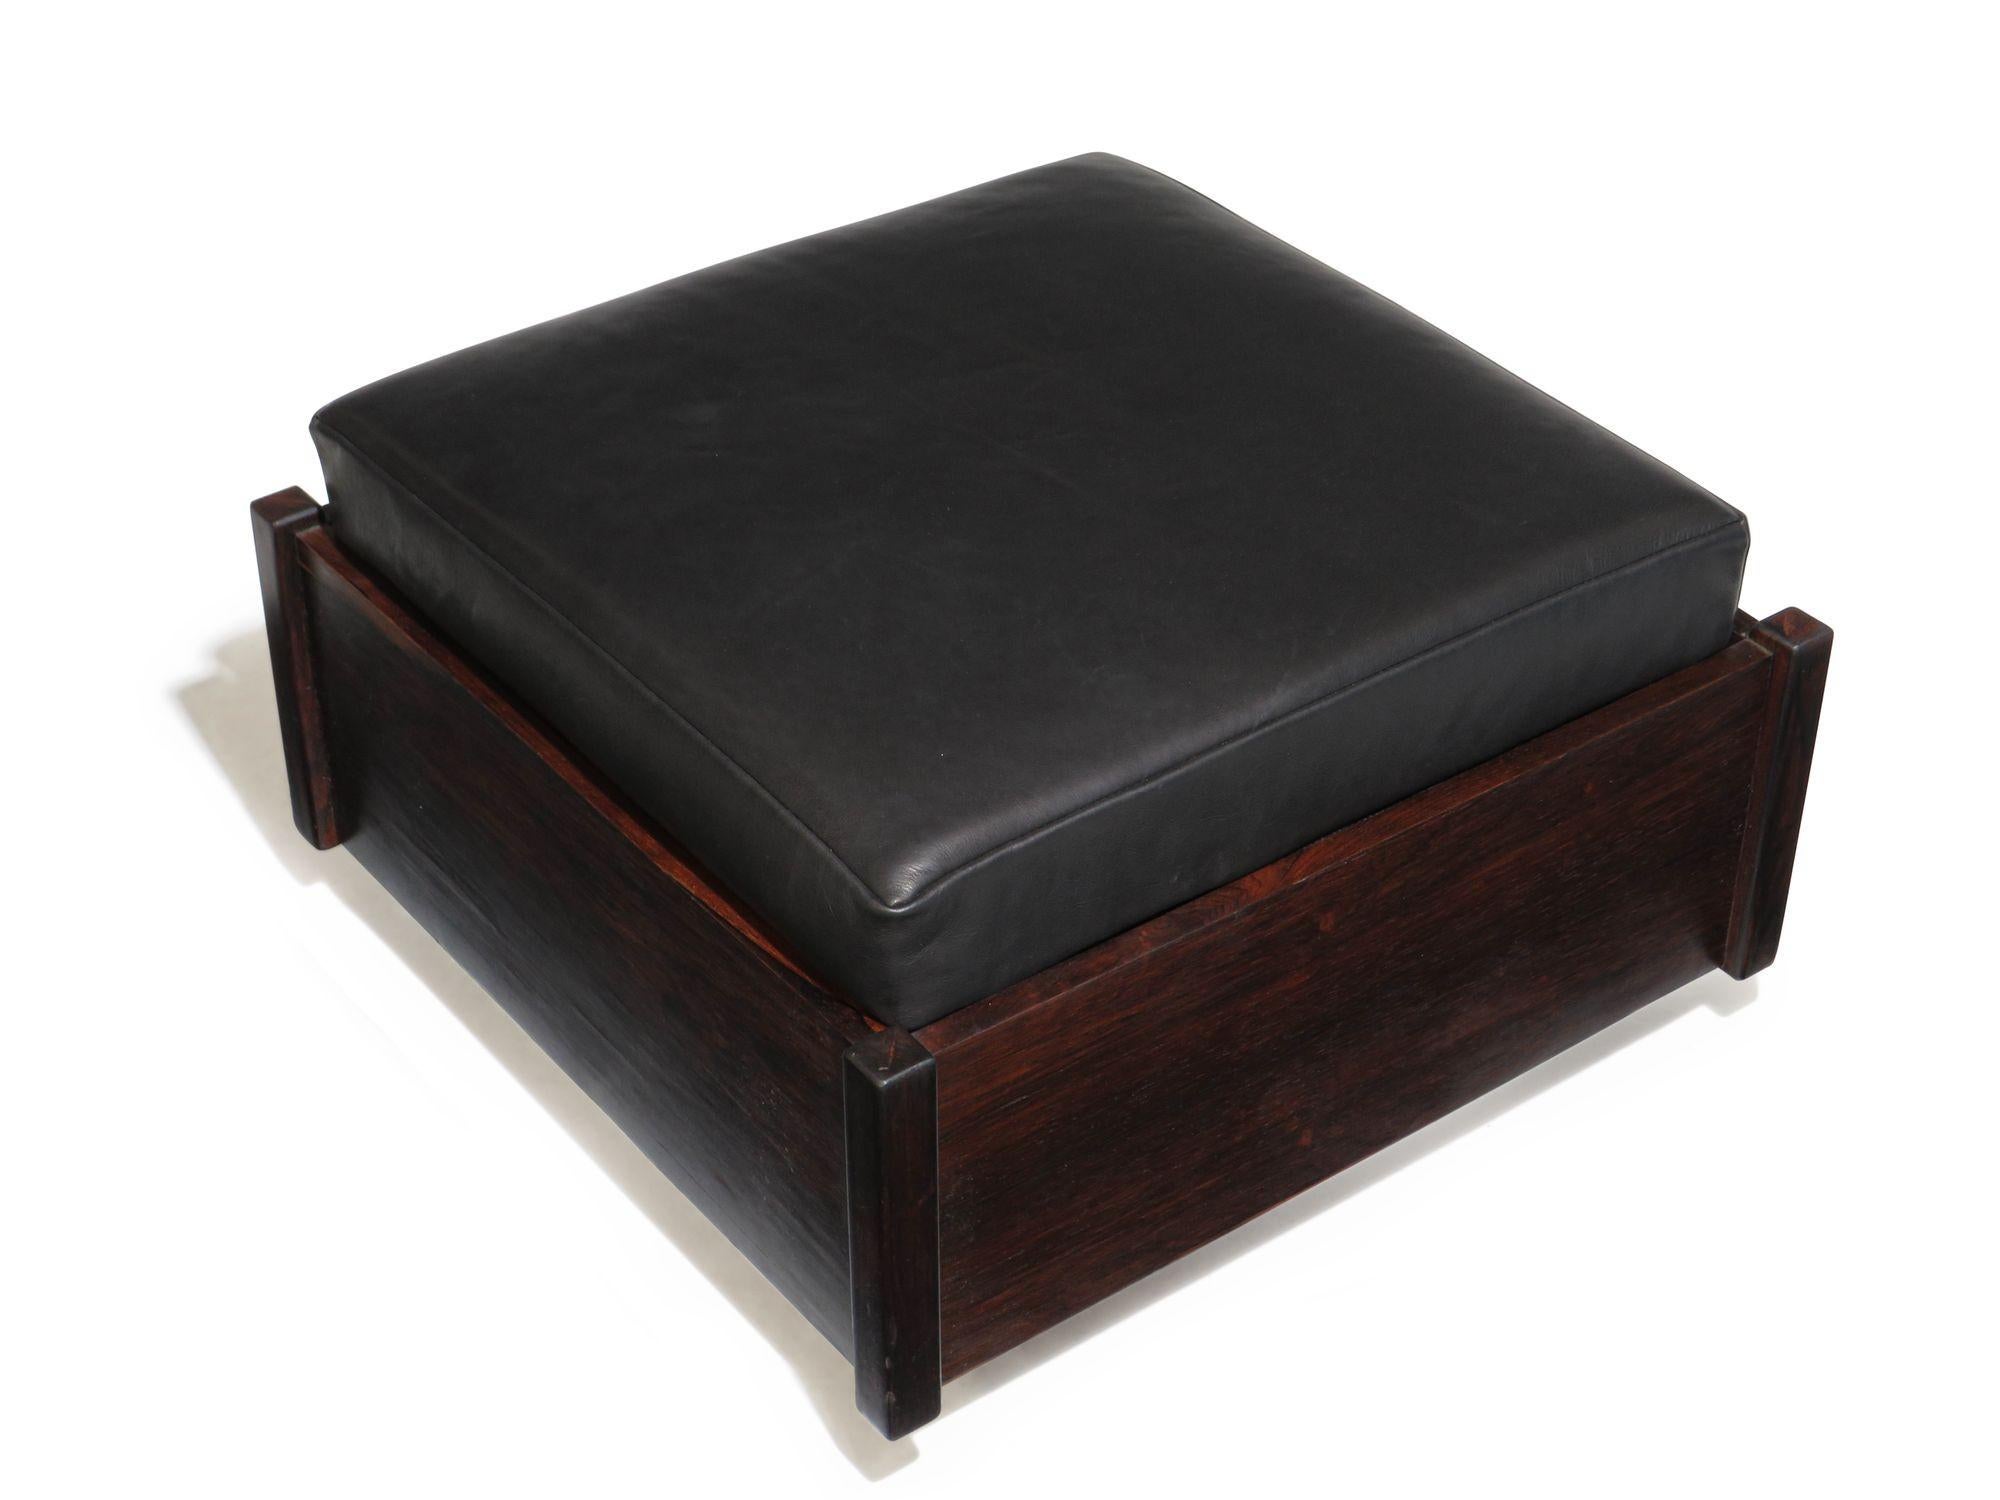 Mid century rosewood ottoman/bench by Munis Zilberberg for Celina Decorações, Brazil.
Crafted of Brazilian rosewood with a newly upholstered full-aniline soft black leather cushion over a hidden storage compartment. 